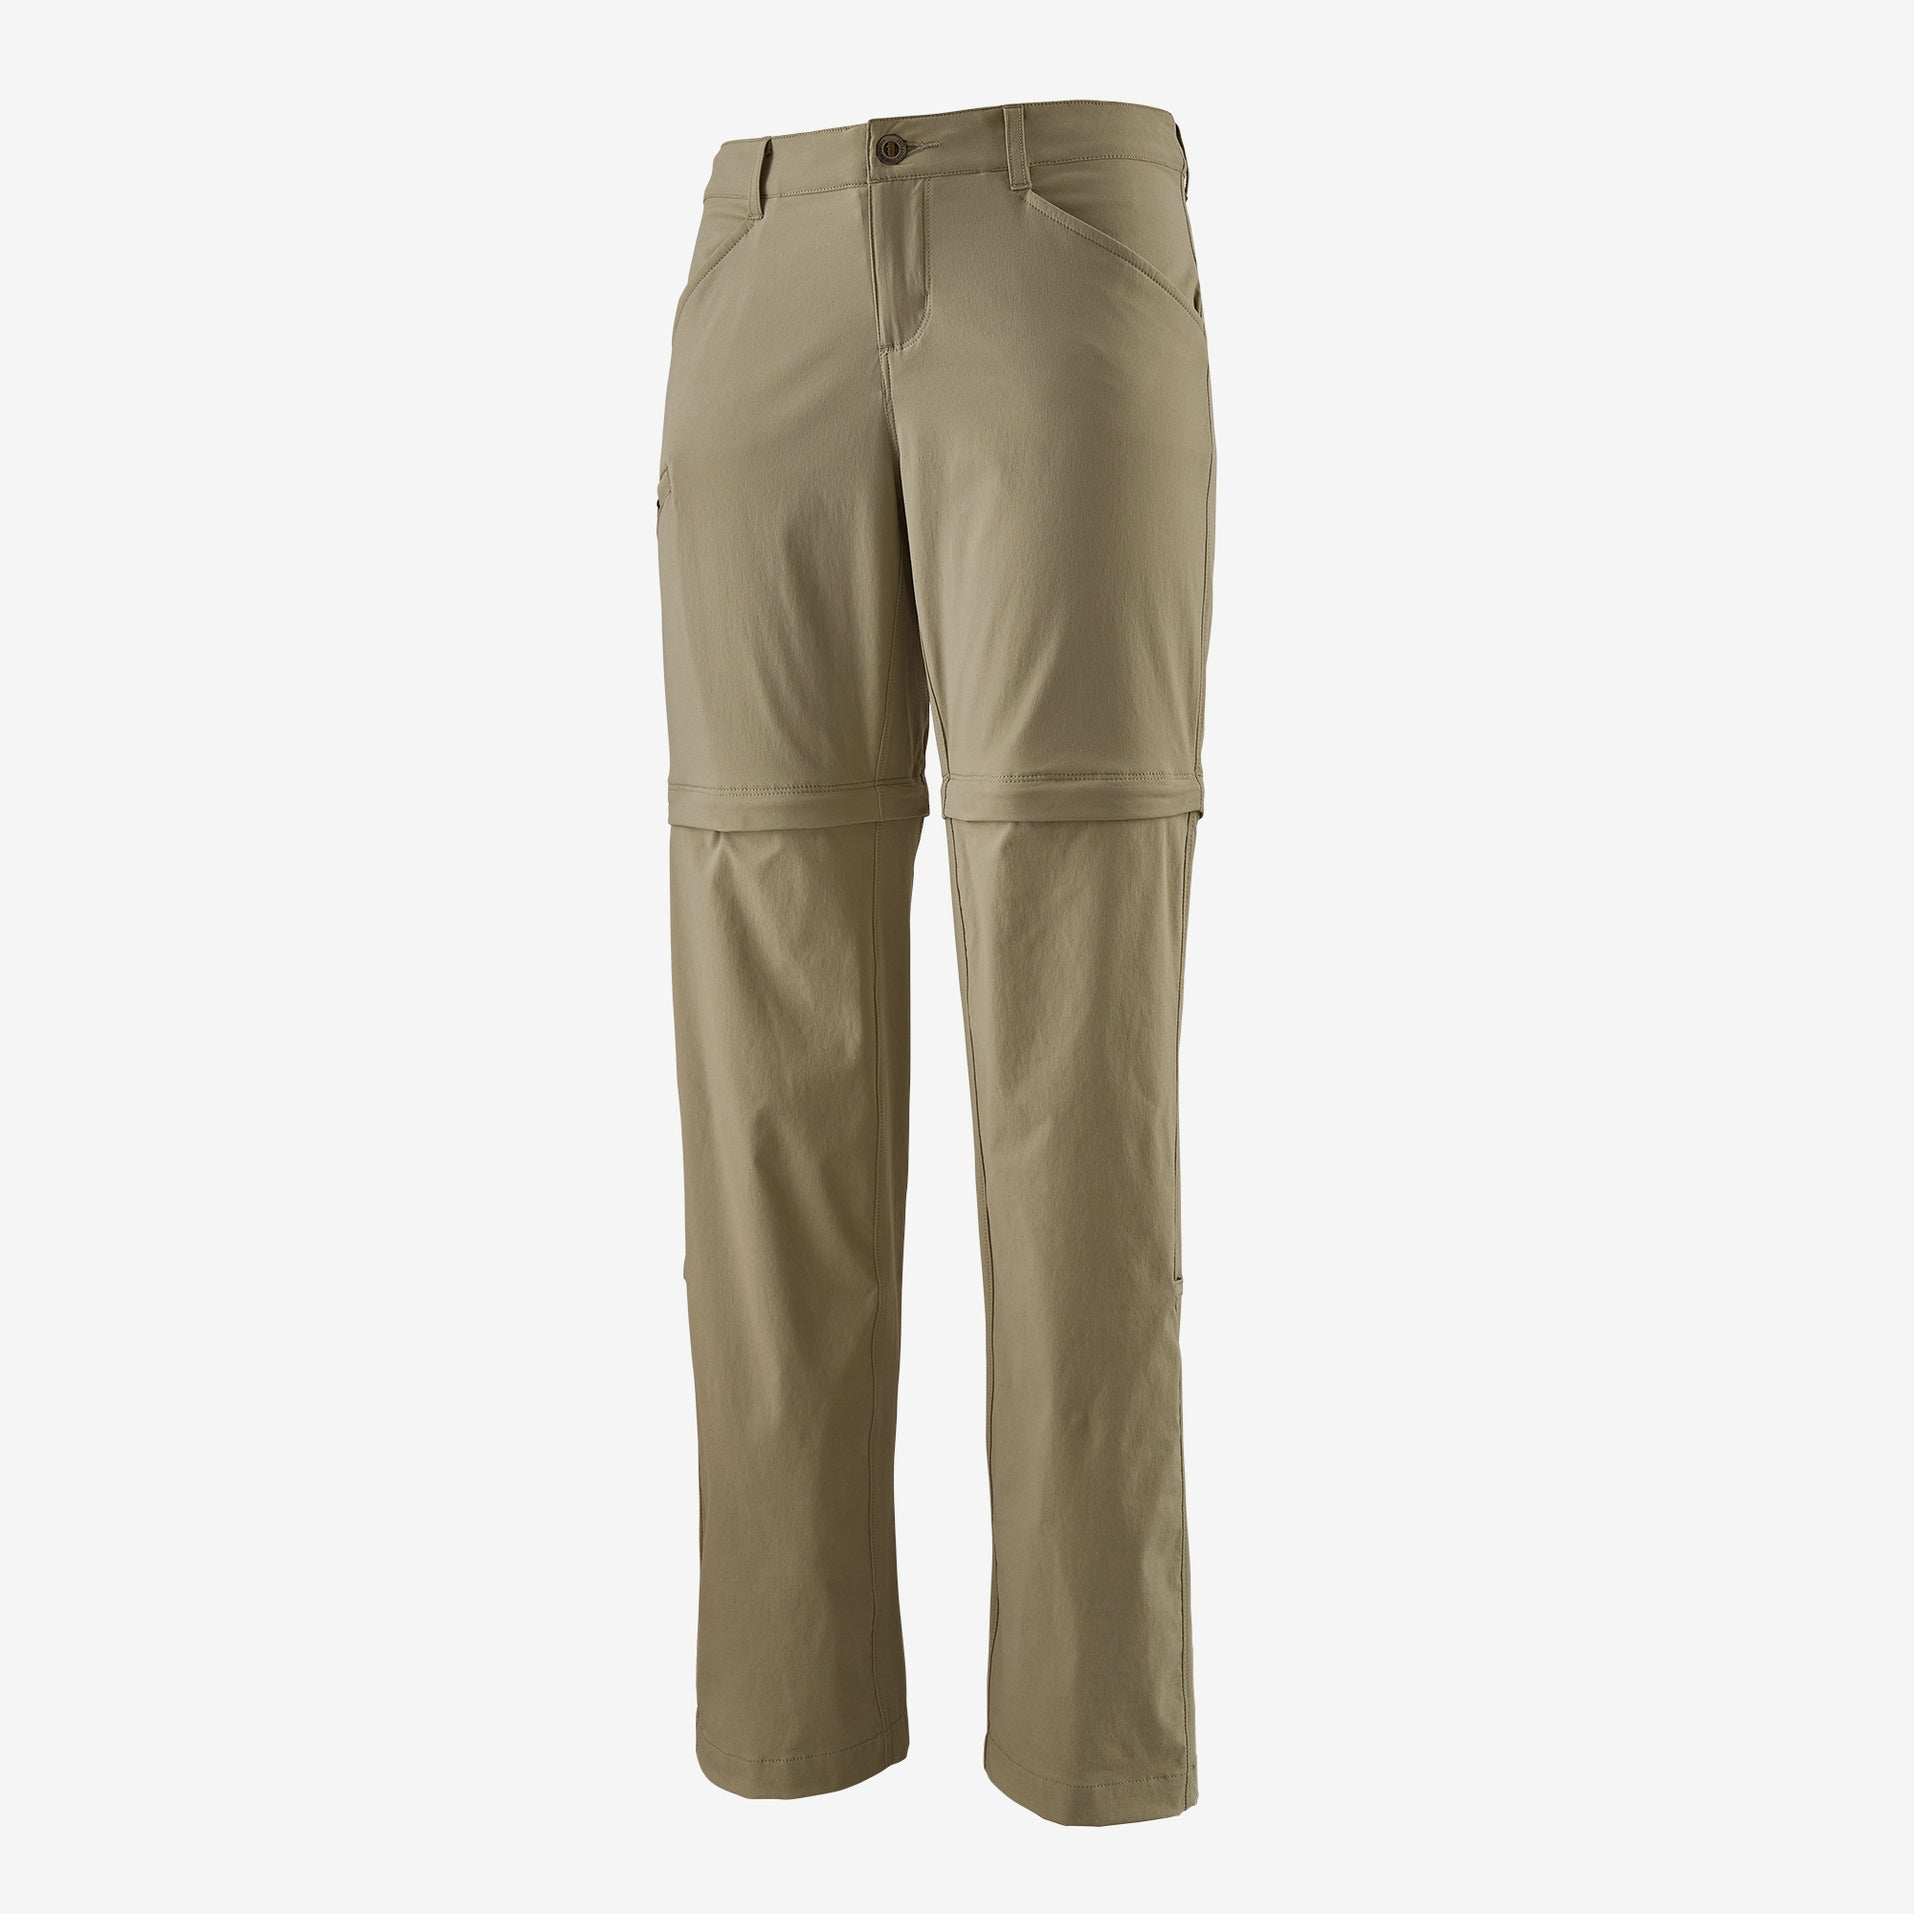 Quandary Convertible Pants Regular - Women's - Forests, Tides, and Treasures